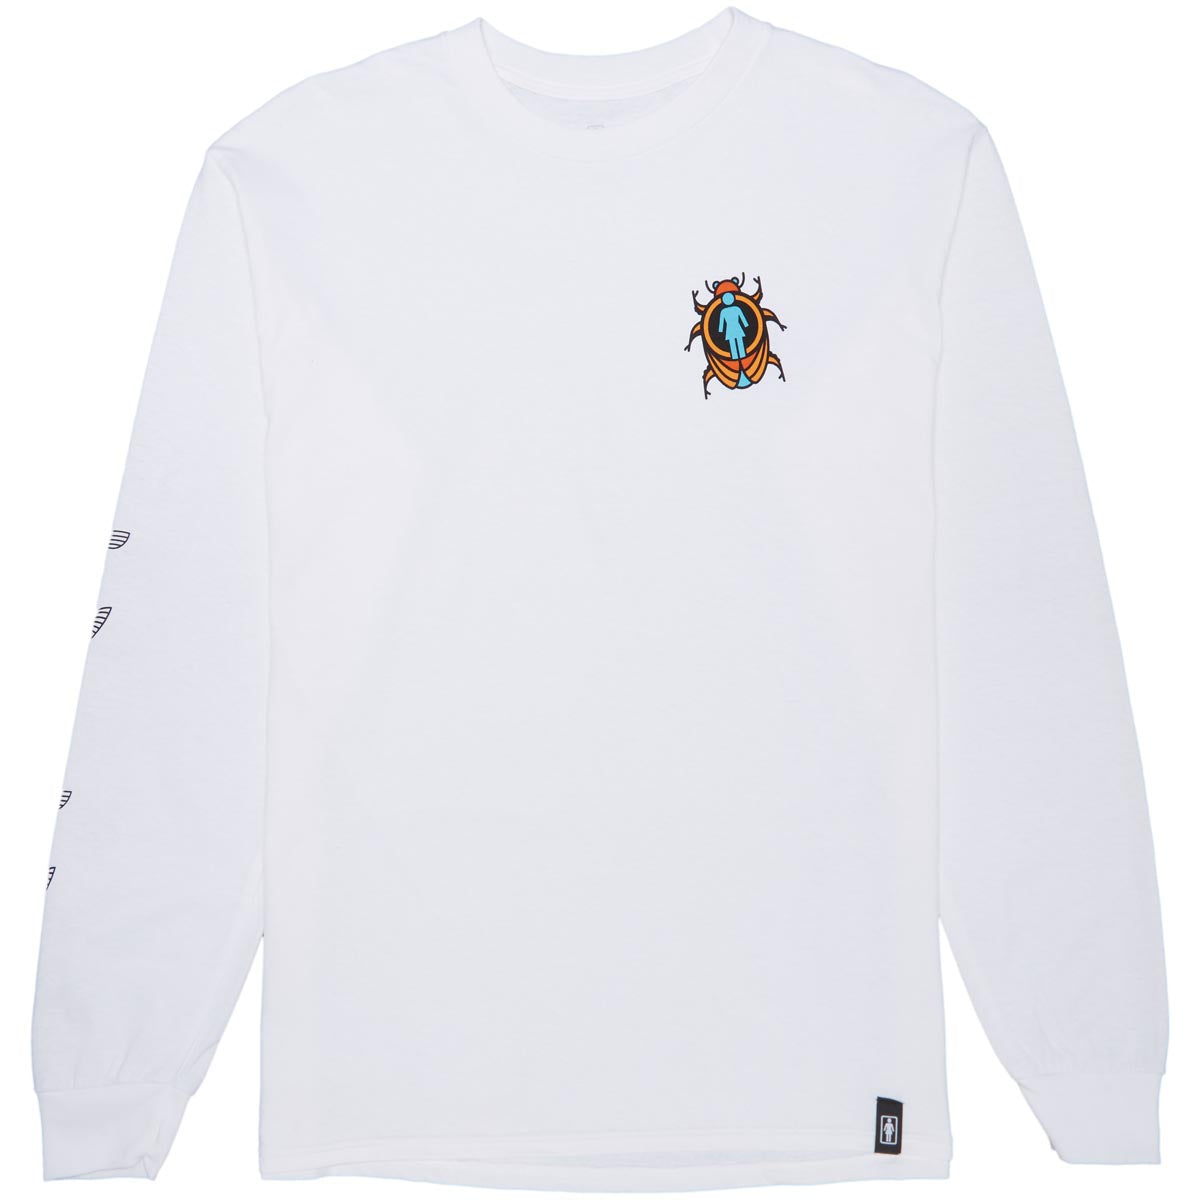 Girl Beetle Attack Long Sleeve T-Shirt - White image 1